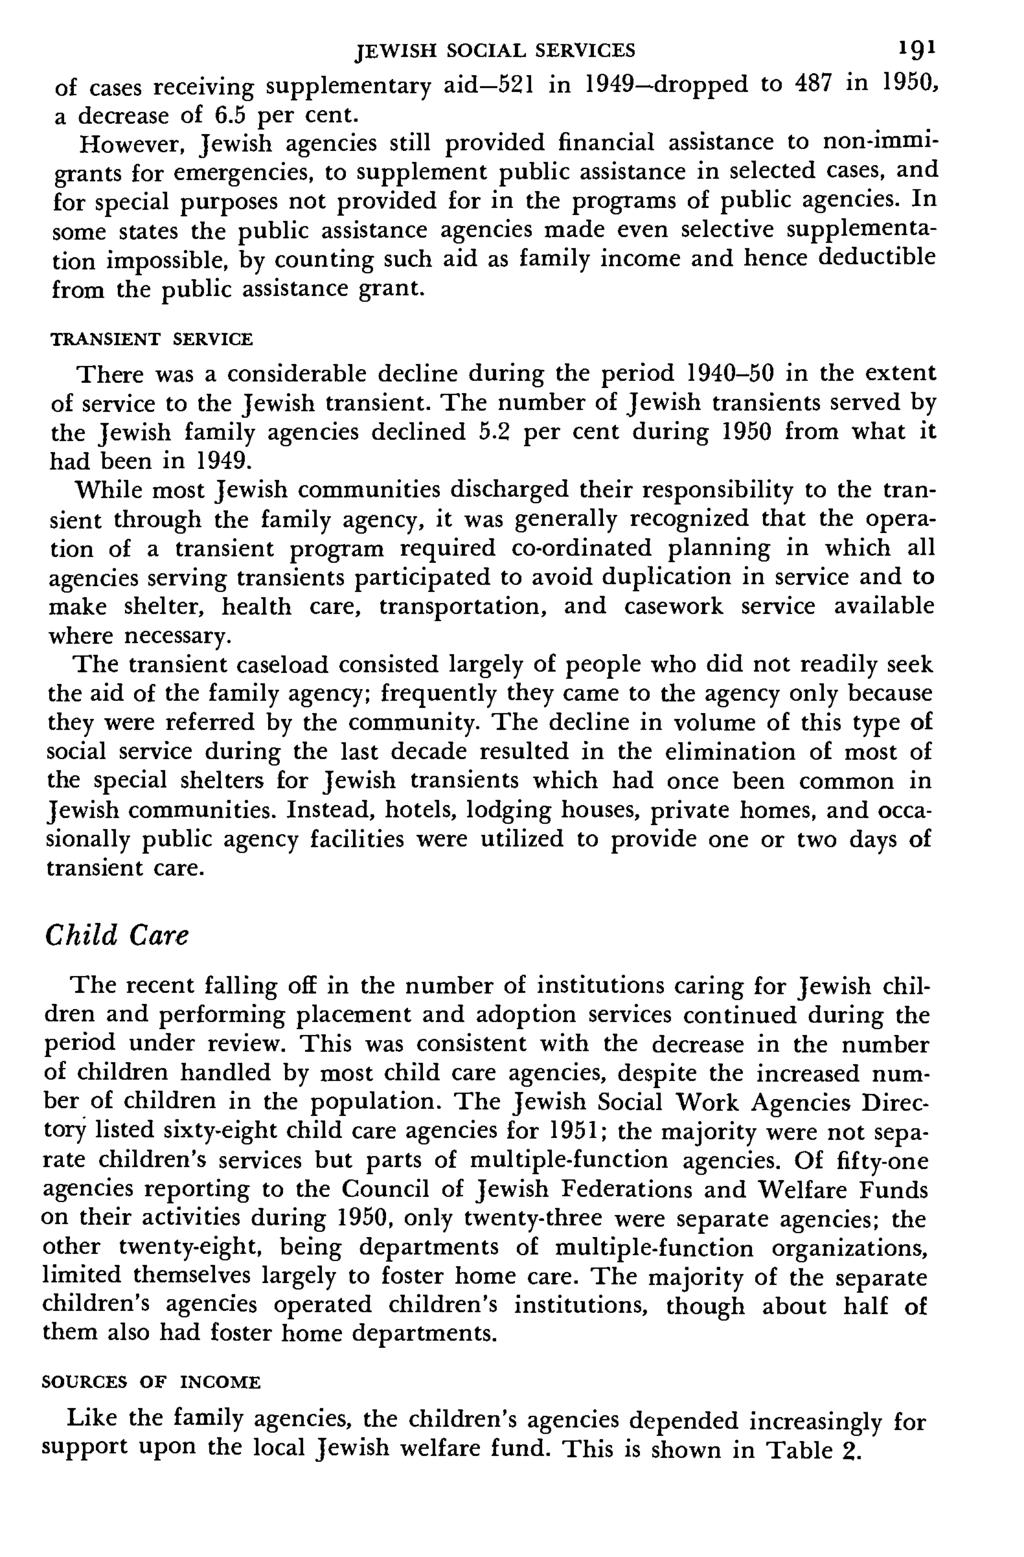 JEWISH SOCIAL SERVICES of cases receiving supplementary aid 521 in 1949 dropped to 487 in 1950, a decrease of 6.5 per cent.